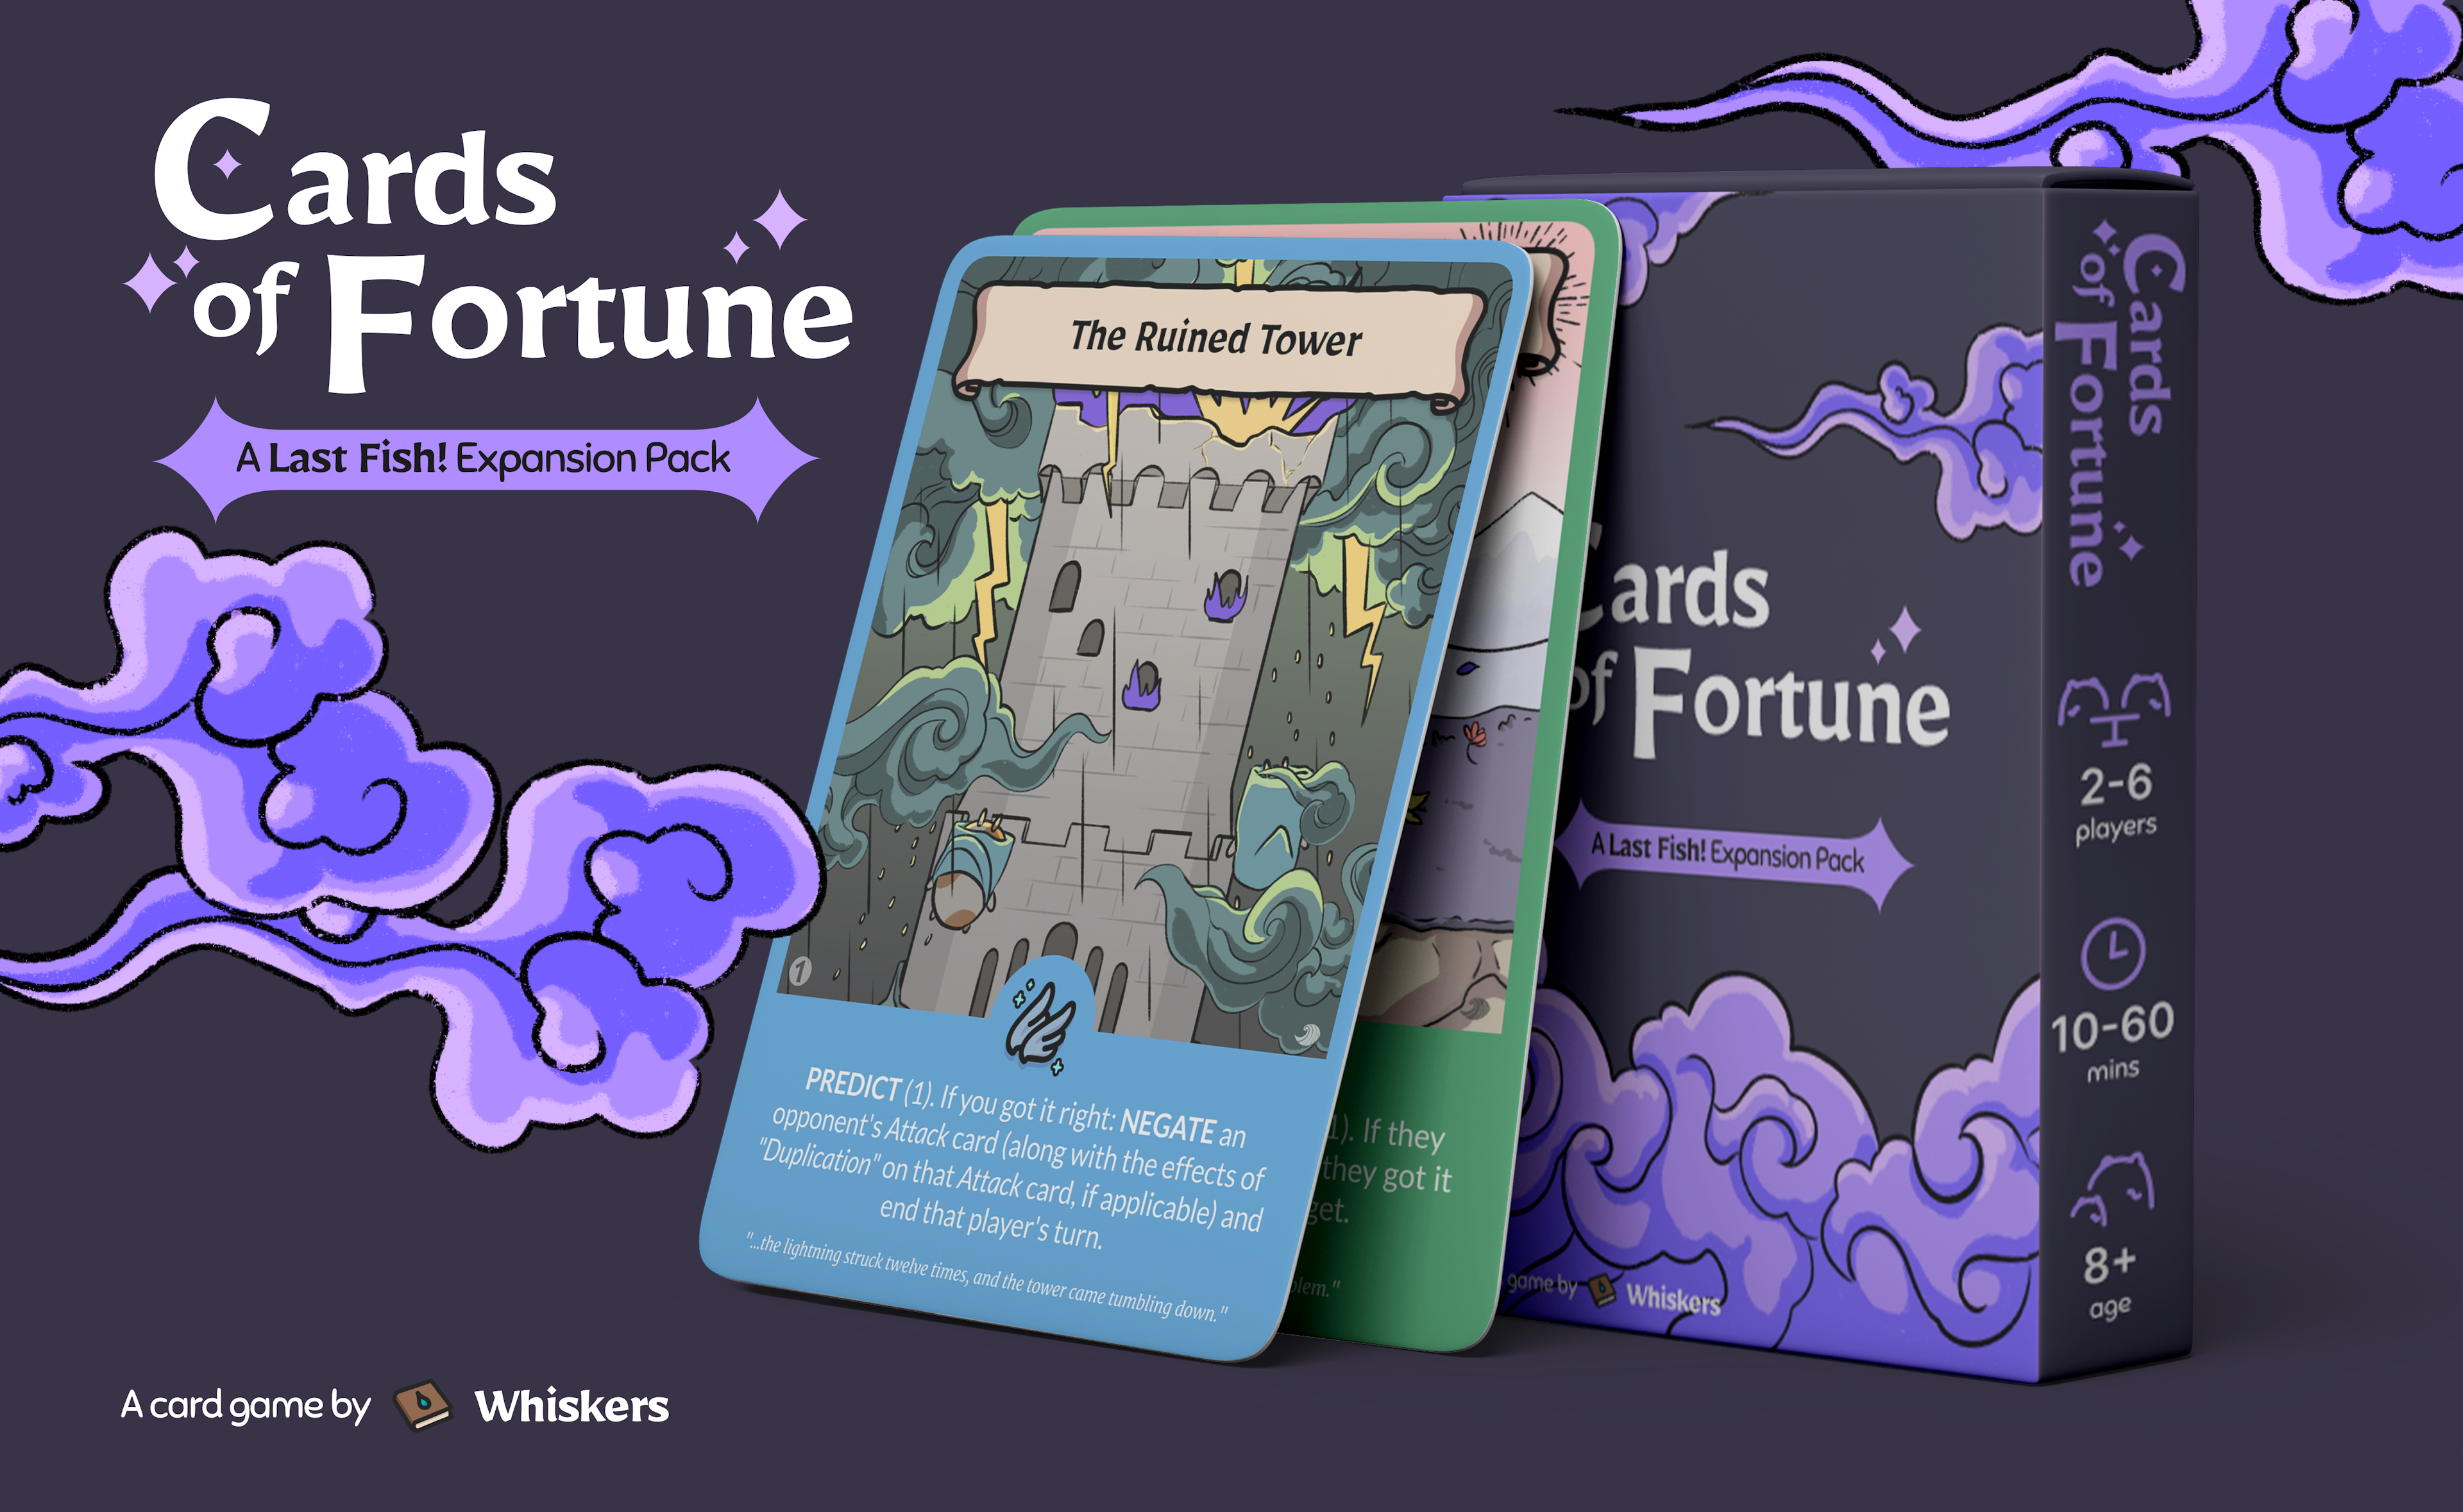 Cards of Fortune, the first Last Fish! Expansion.